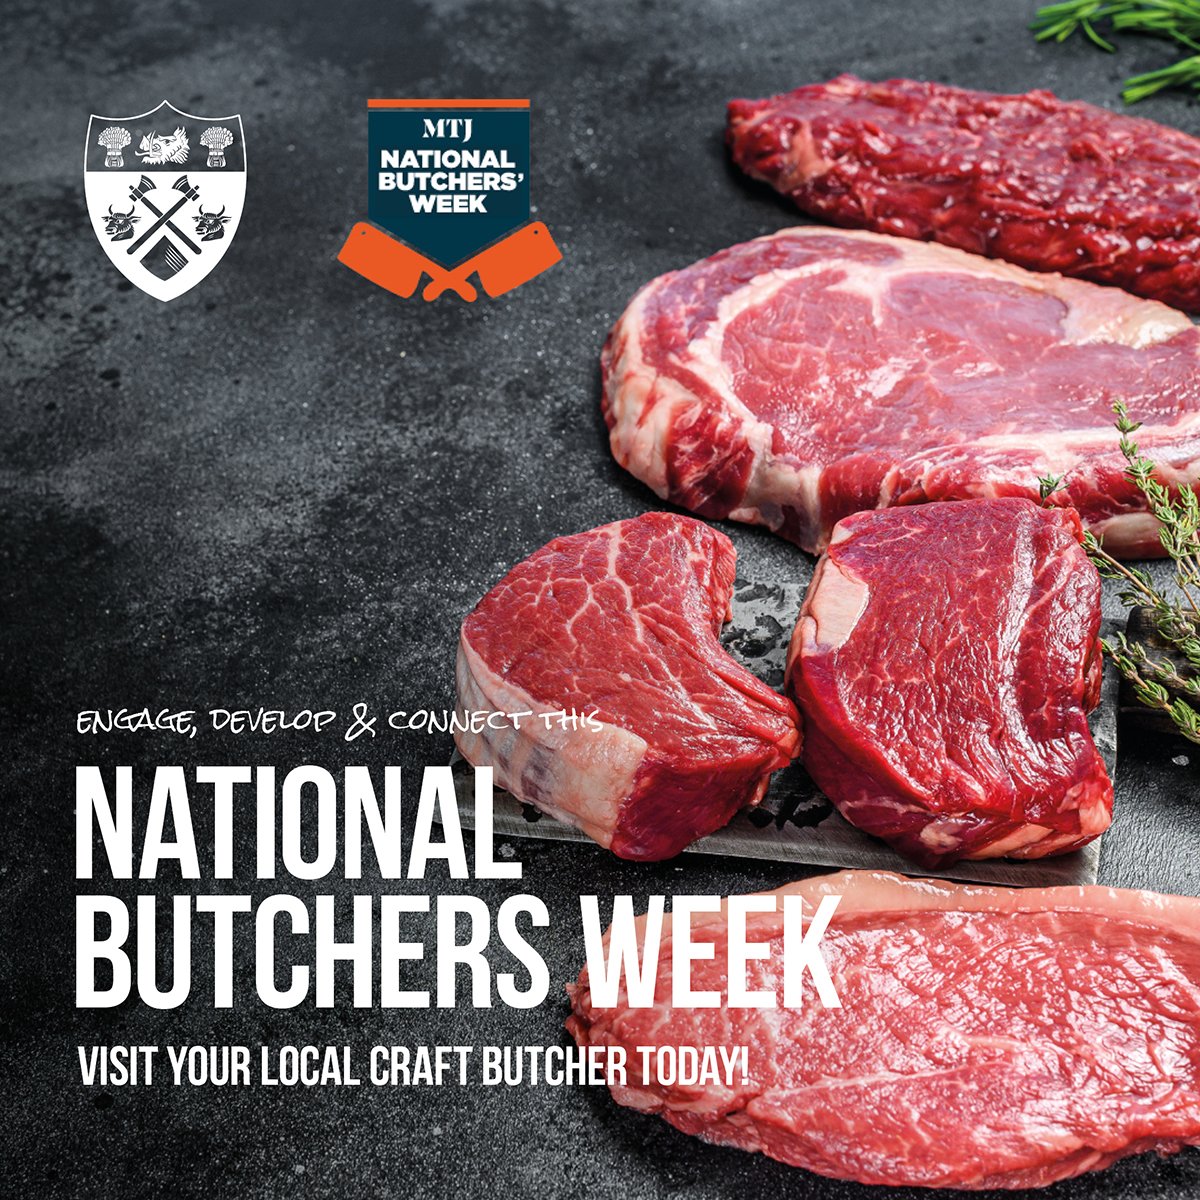 4th to 10th March is National Butchers Week visit your local butcher today!

#NationalButchersWeek #Butchers #ButcherShop #CraftButchers